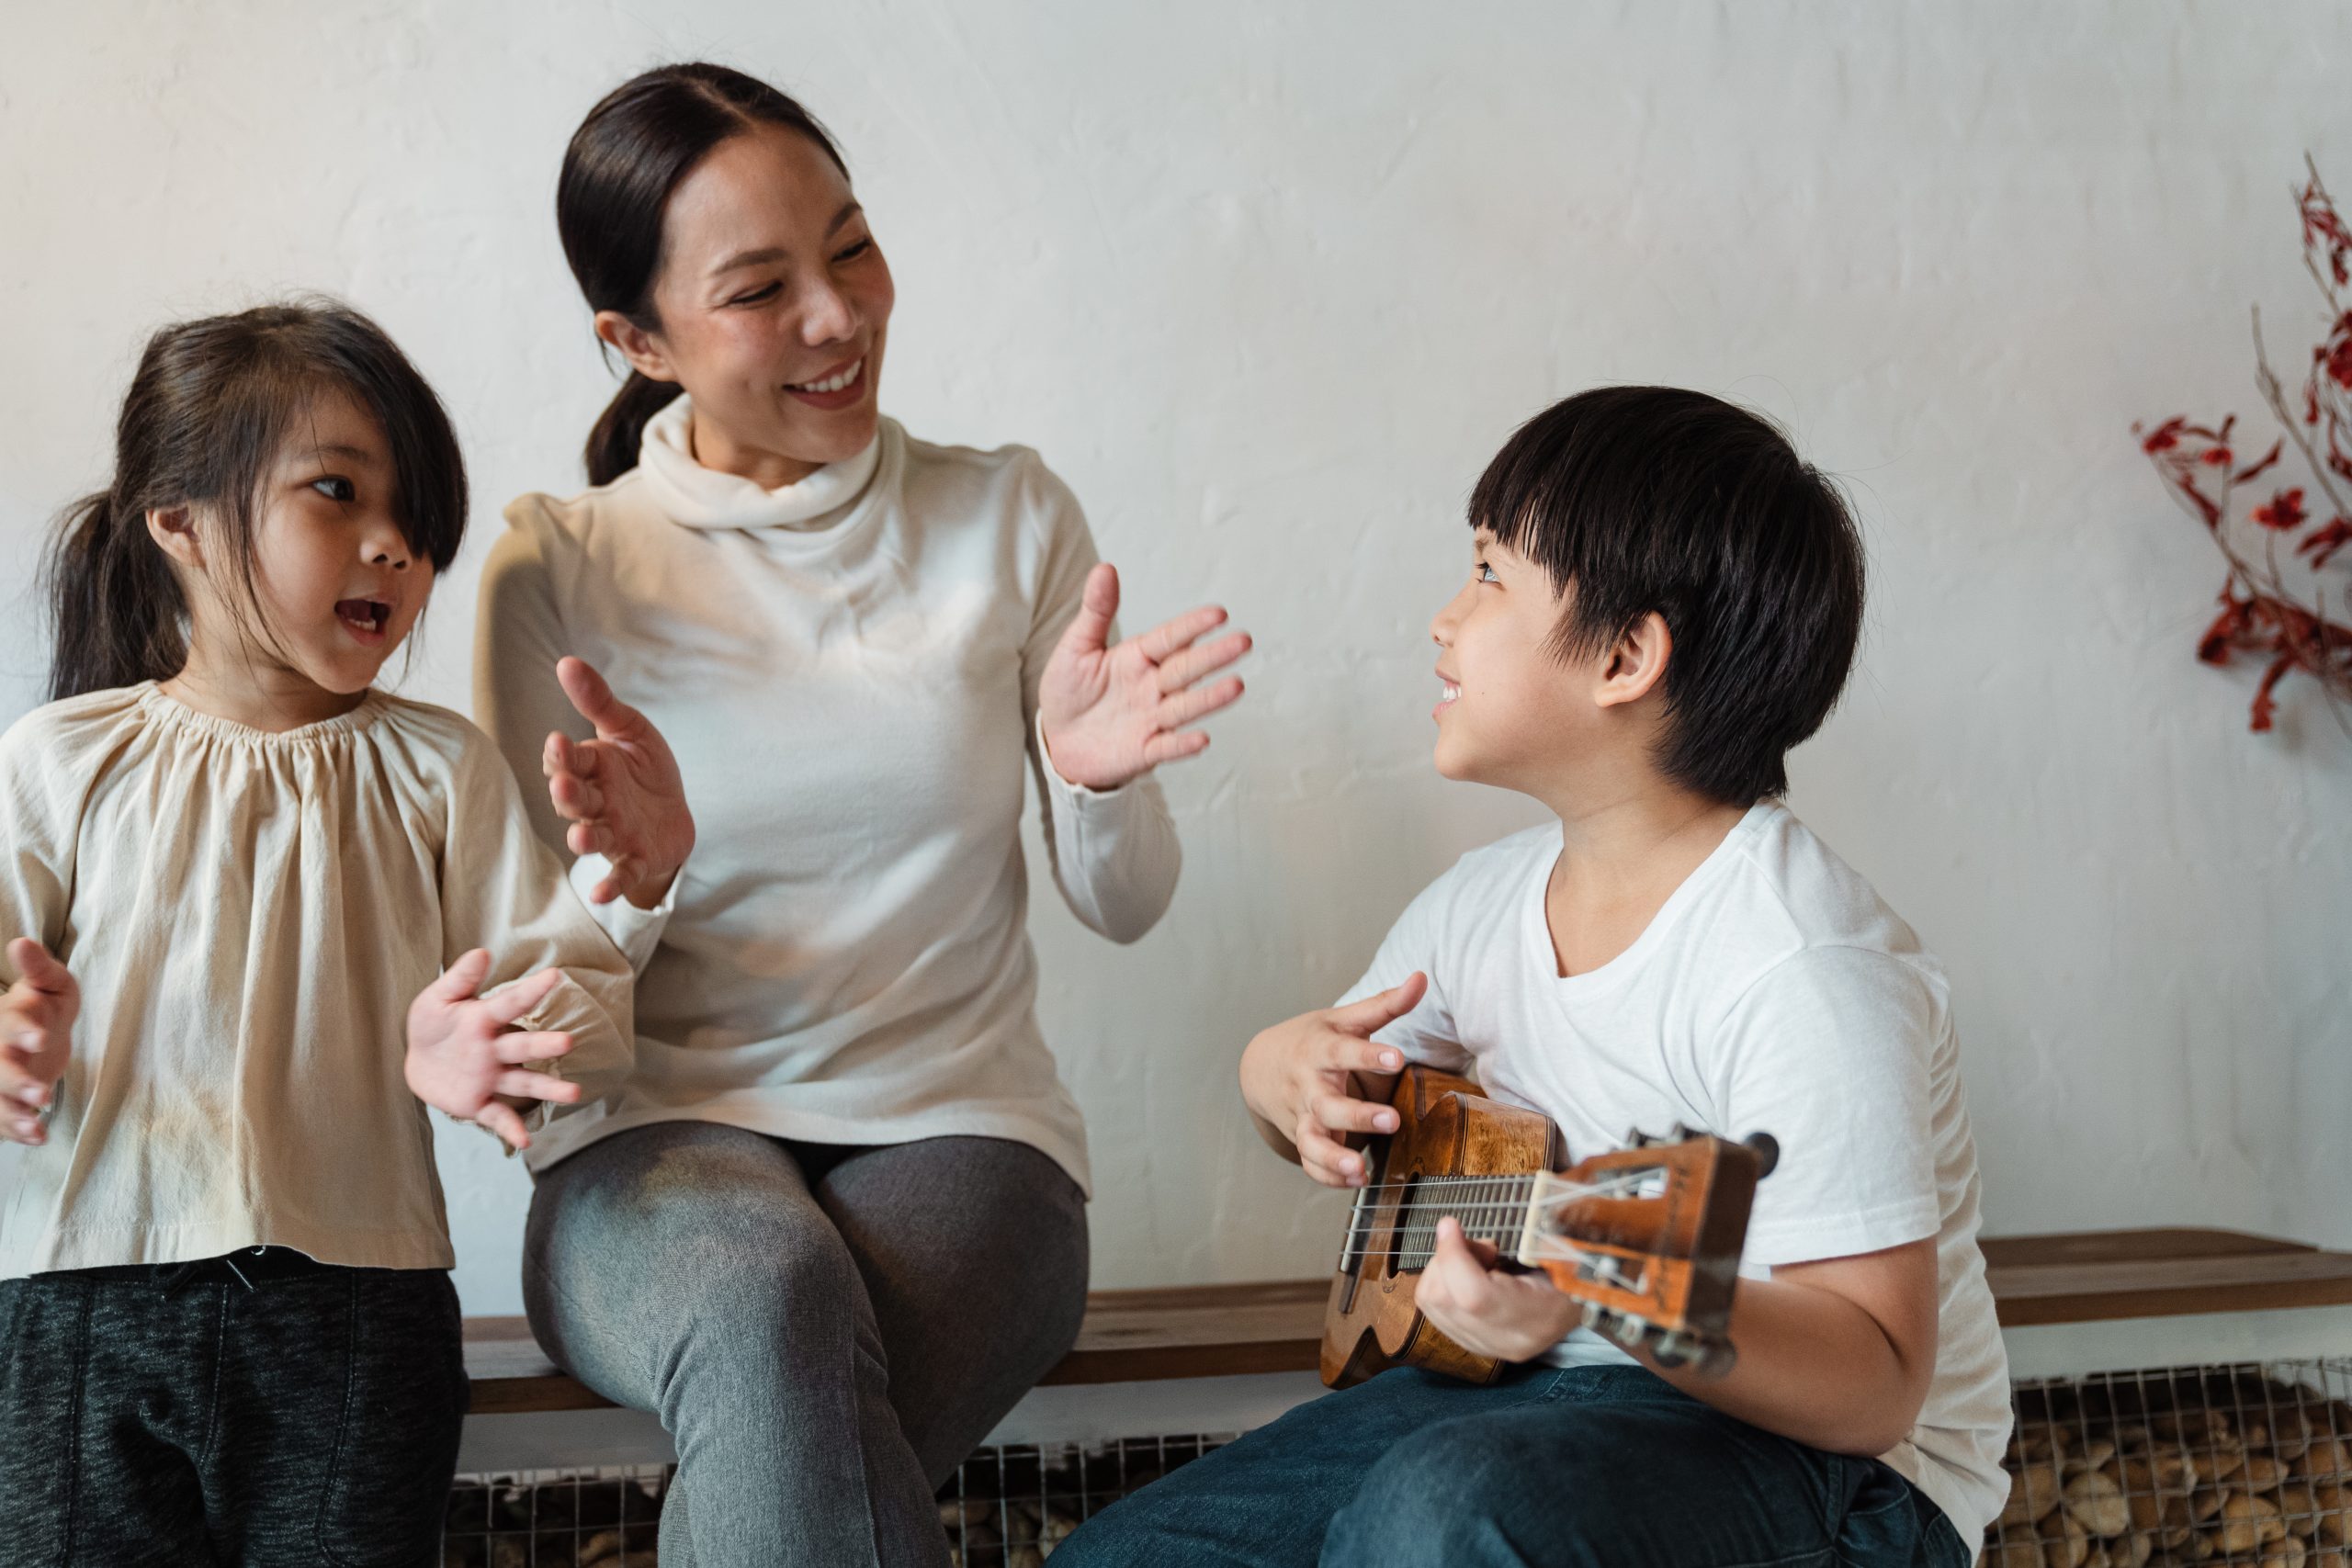 Mother And Little Girl Clapping And Singing While Boy Plays Ukulele - Teach Rhythm And Beat In The Homeschool